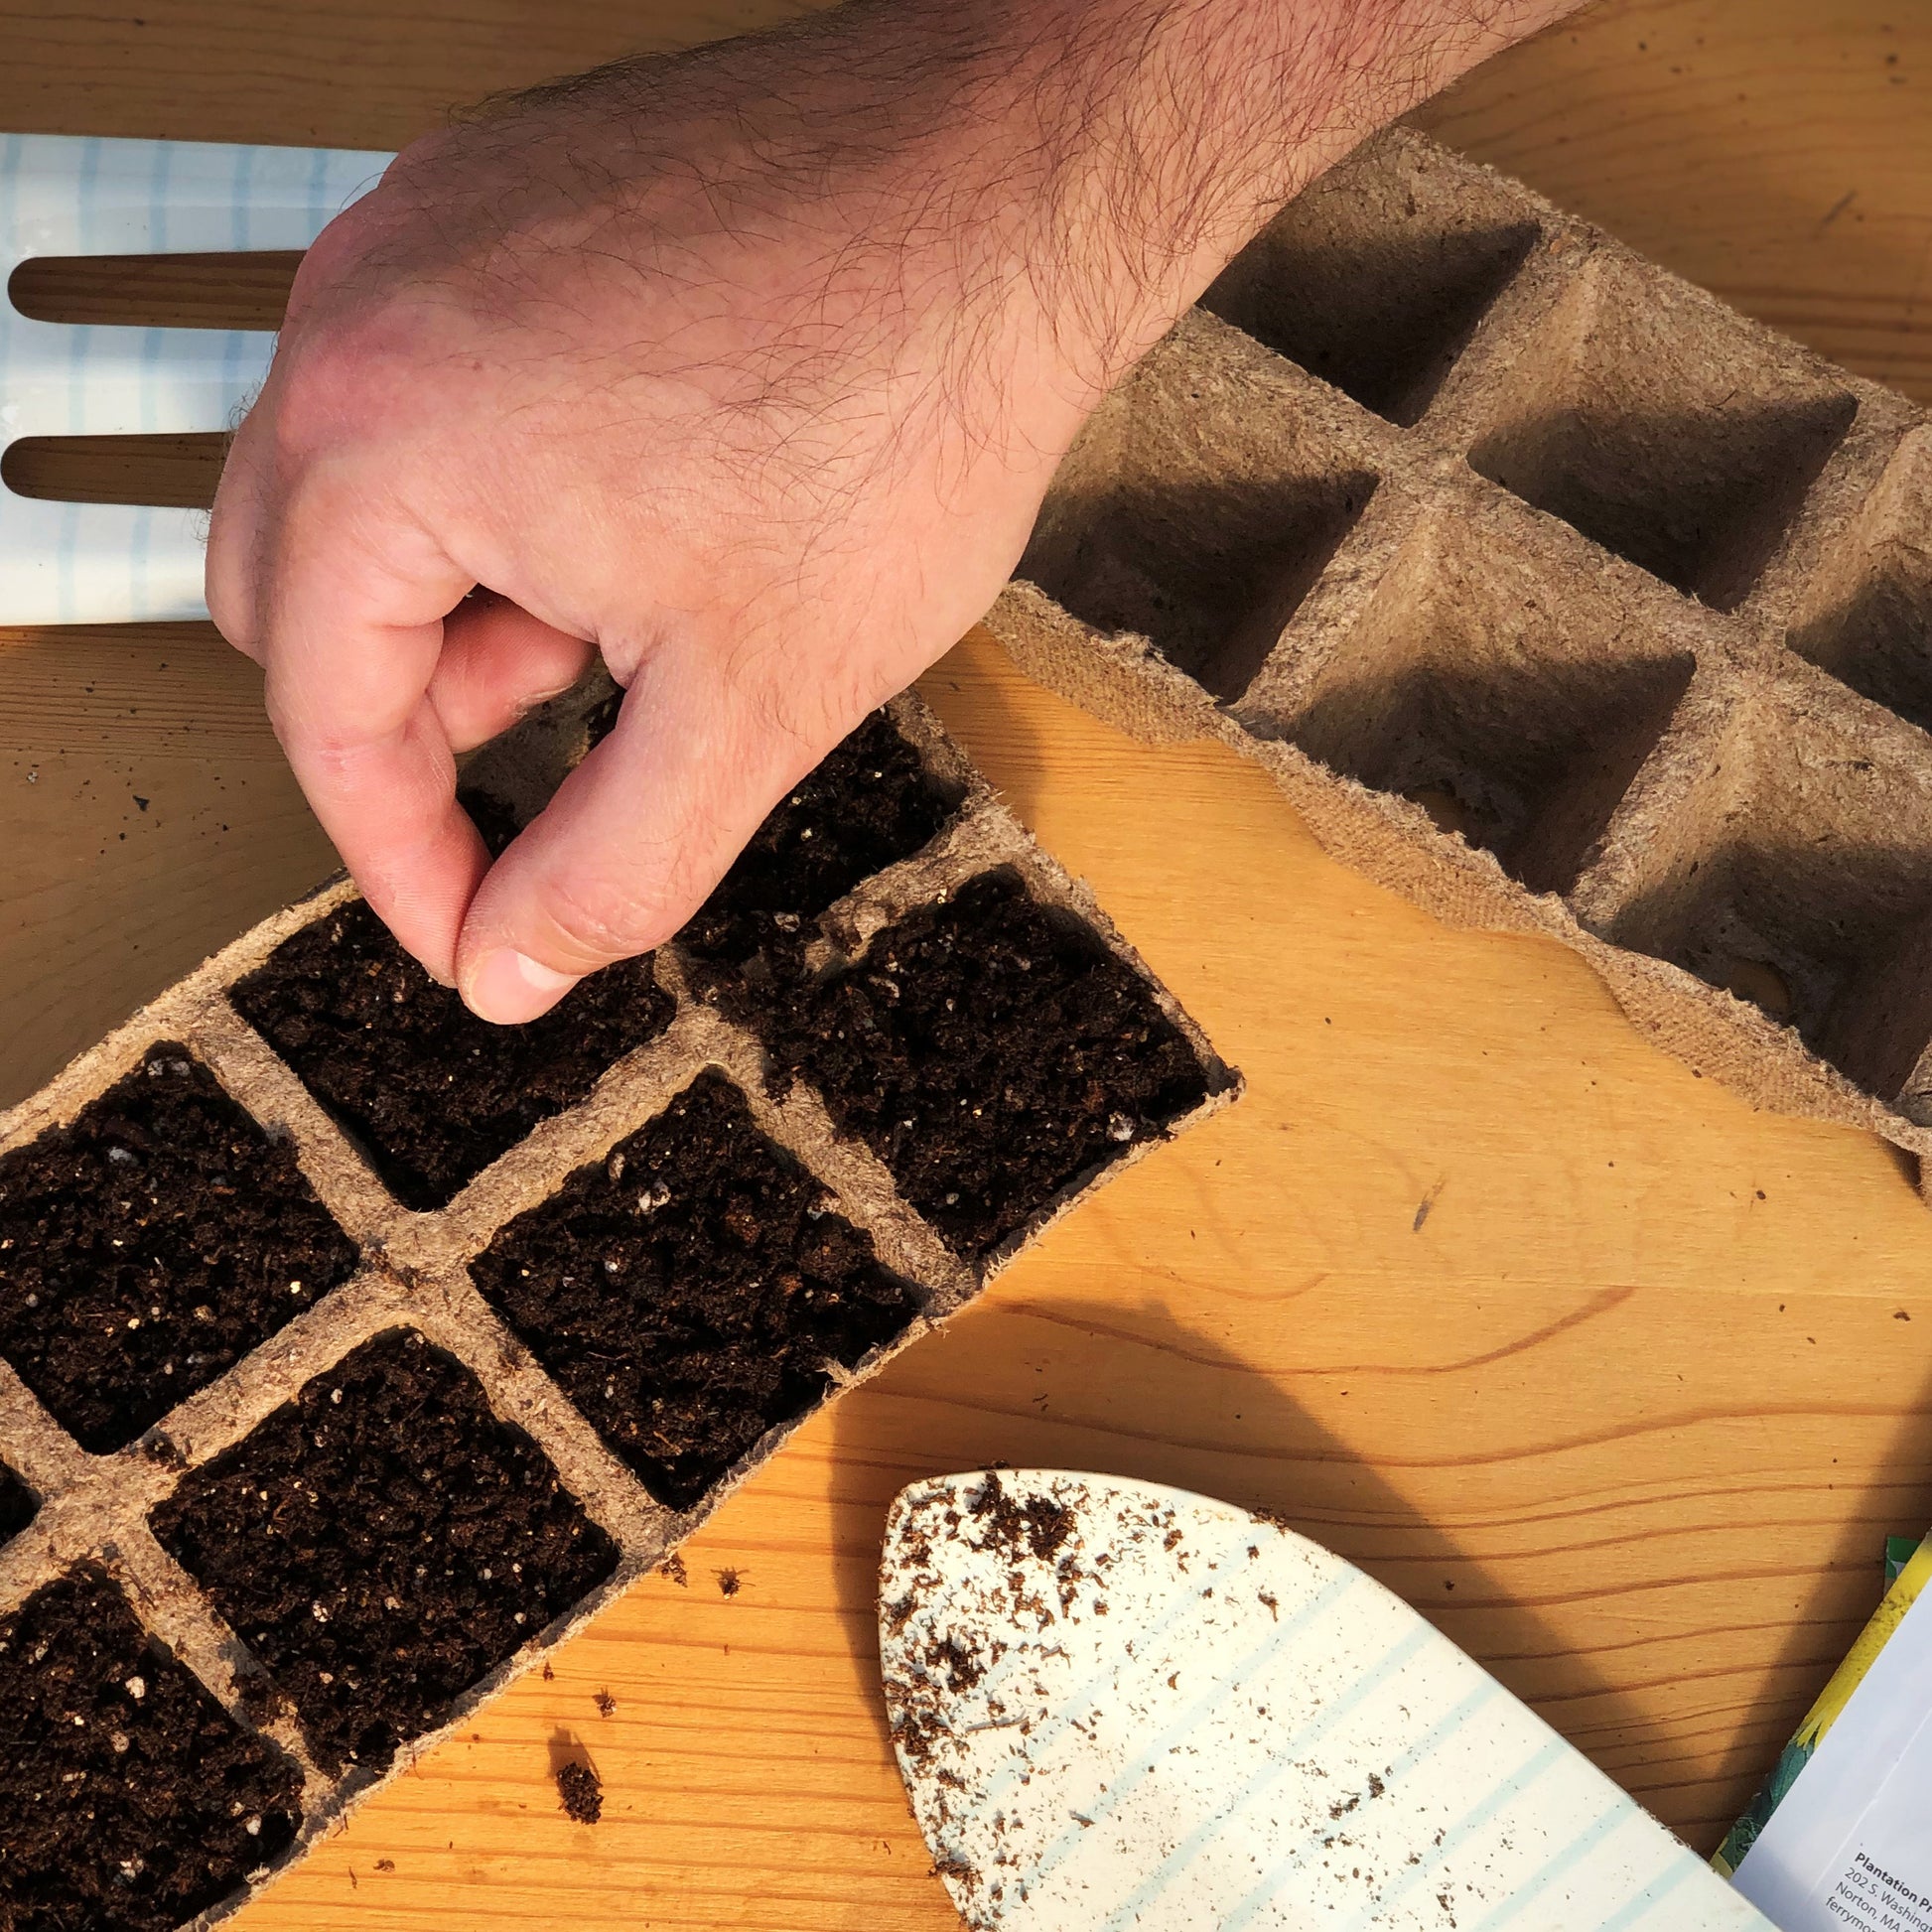 Start your Fordhook Zucchini Organic Squash seeds in biodegradable peat strips or paper strips for easy transplanting and to avoid root shock in your seedlings.